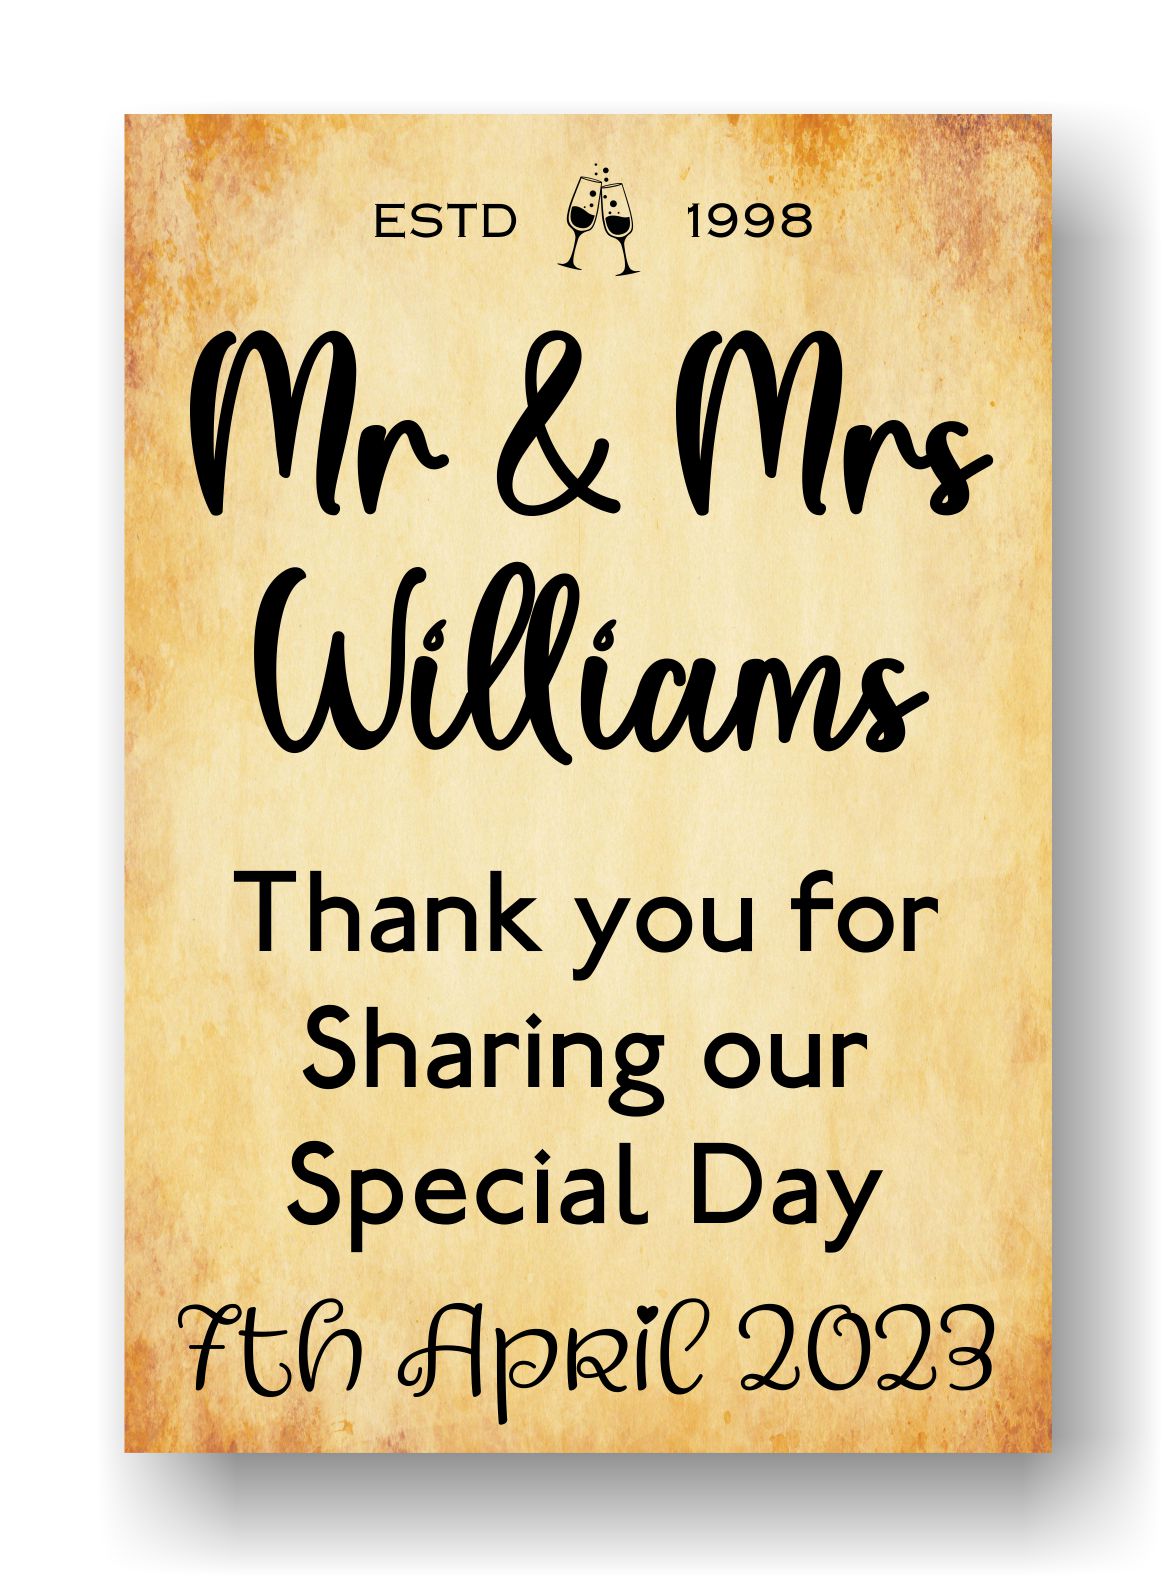 Wedding Reception Bottle Labels x2 - Vintage Style - Any Name Date Year and Message - To fit Wine Alcohol Bottles 68x99mm